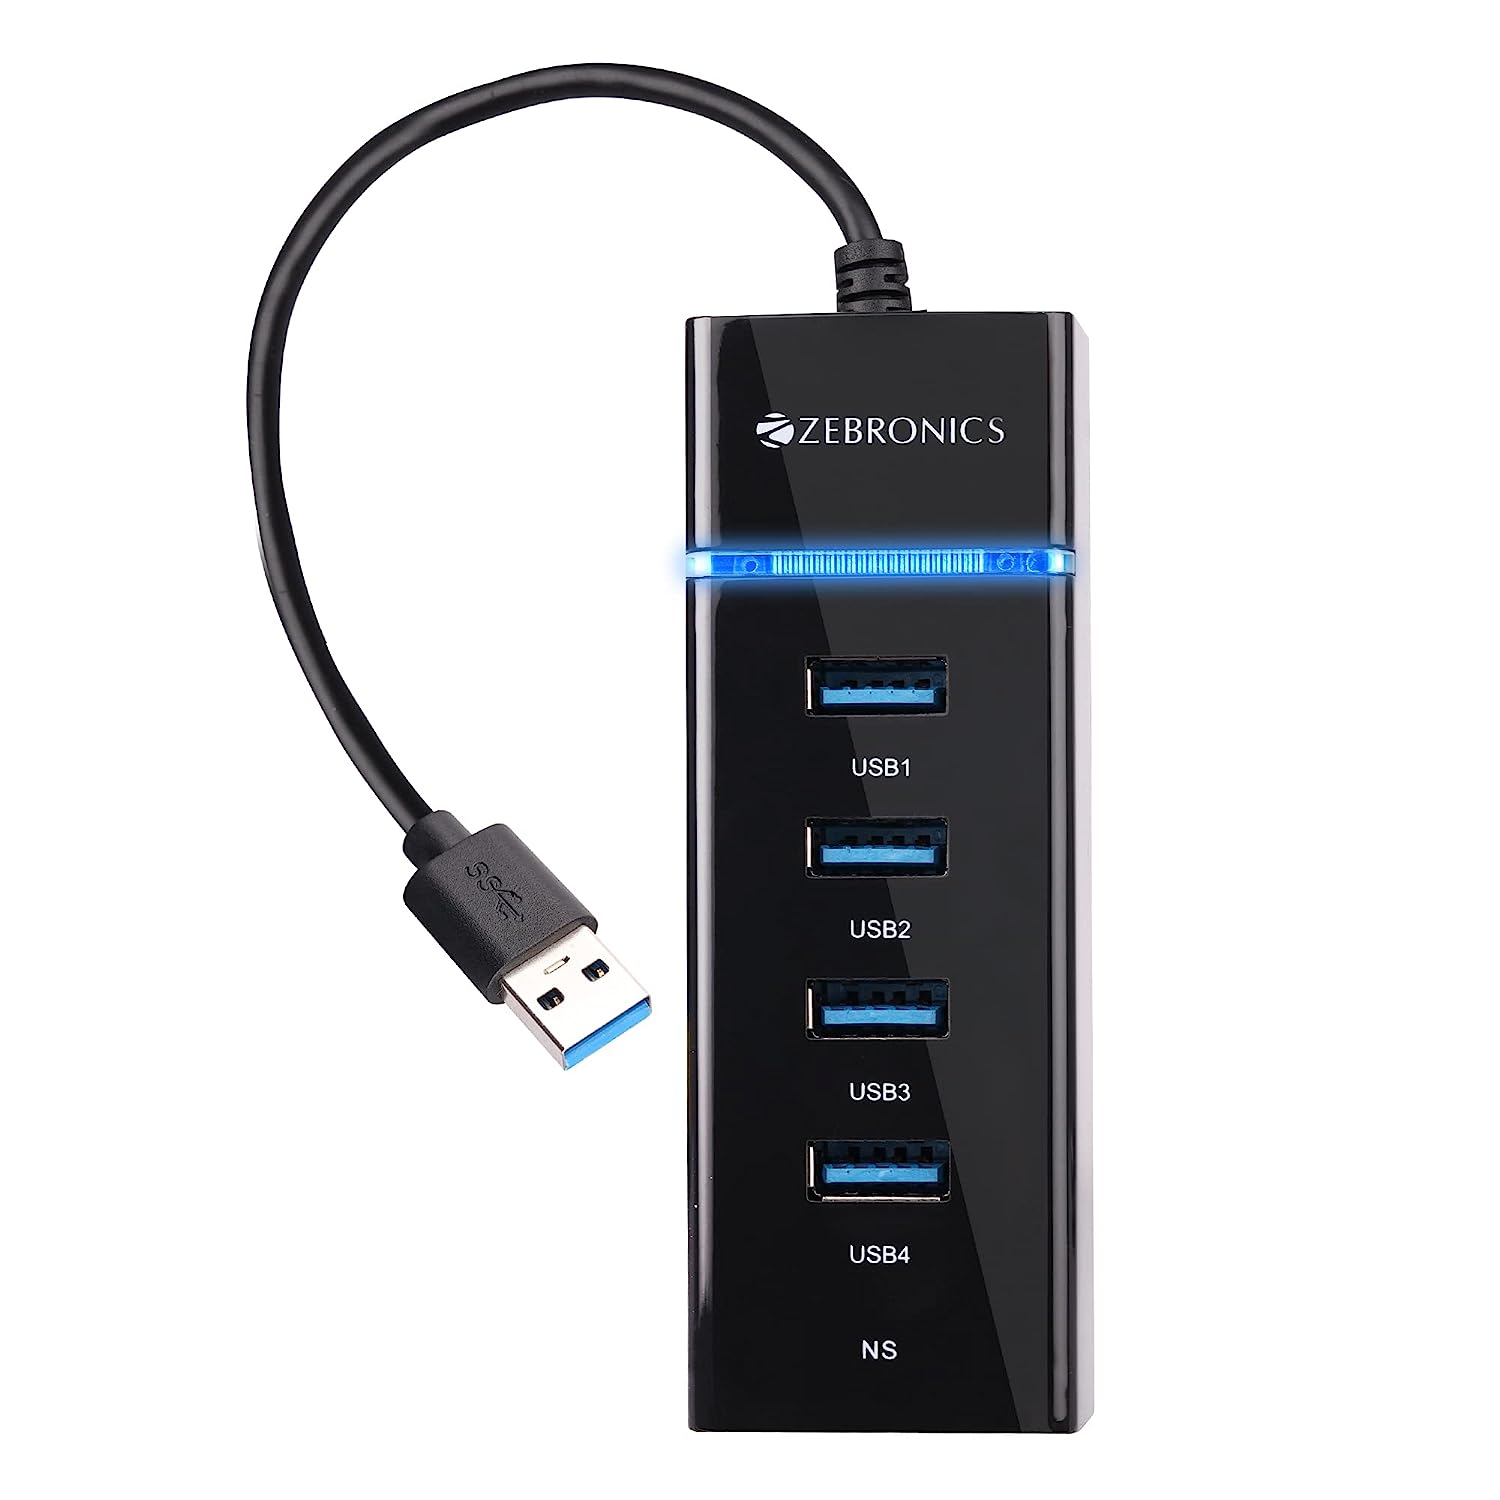 Zebronics 300HB 4 Port USB 3.0 Hub with Hi-Speed Data Transfer, LED Indication, 15cm Cable, Backward Compatible, Multi Device Connection, Plug Play Usage, Glossy Finish and Lightweight Design